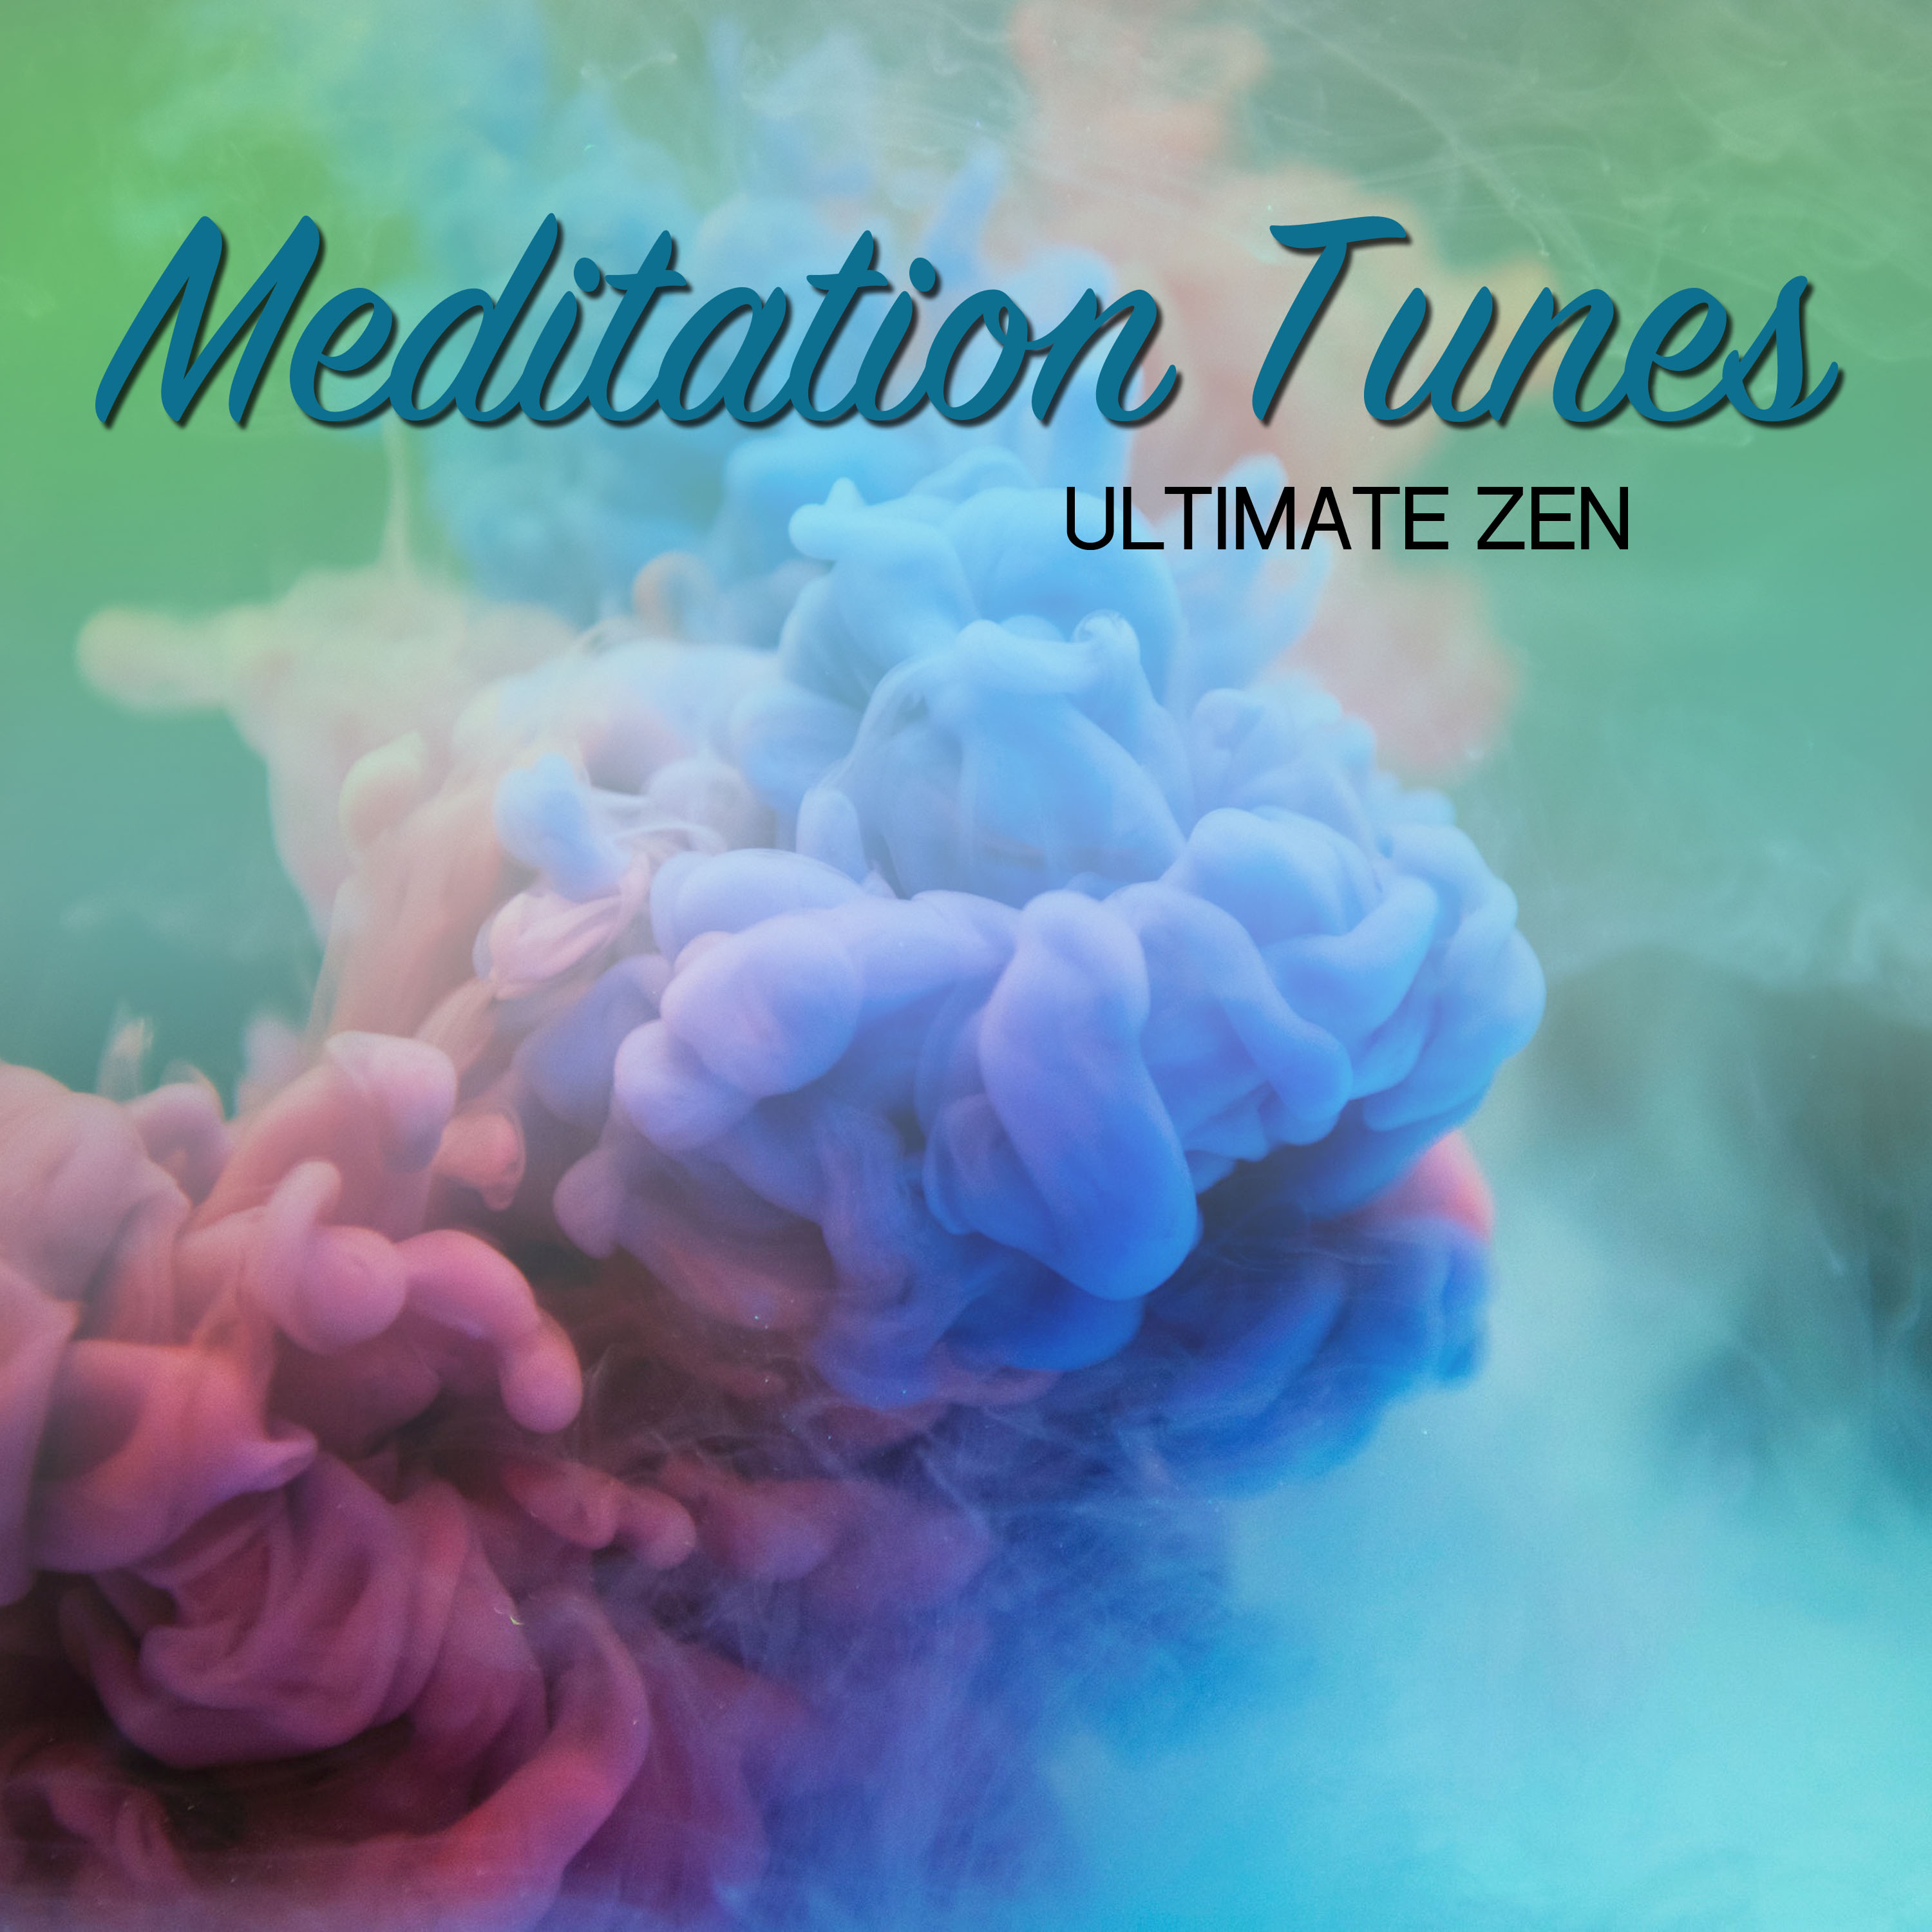 11 Relaxing Sounds -Meditative and Calming